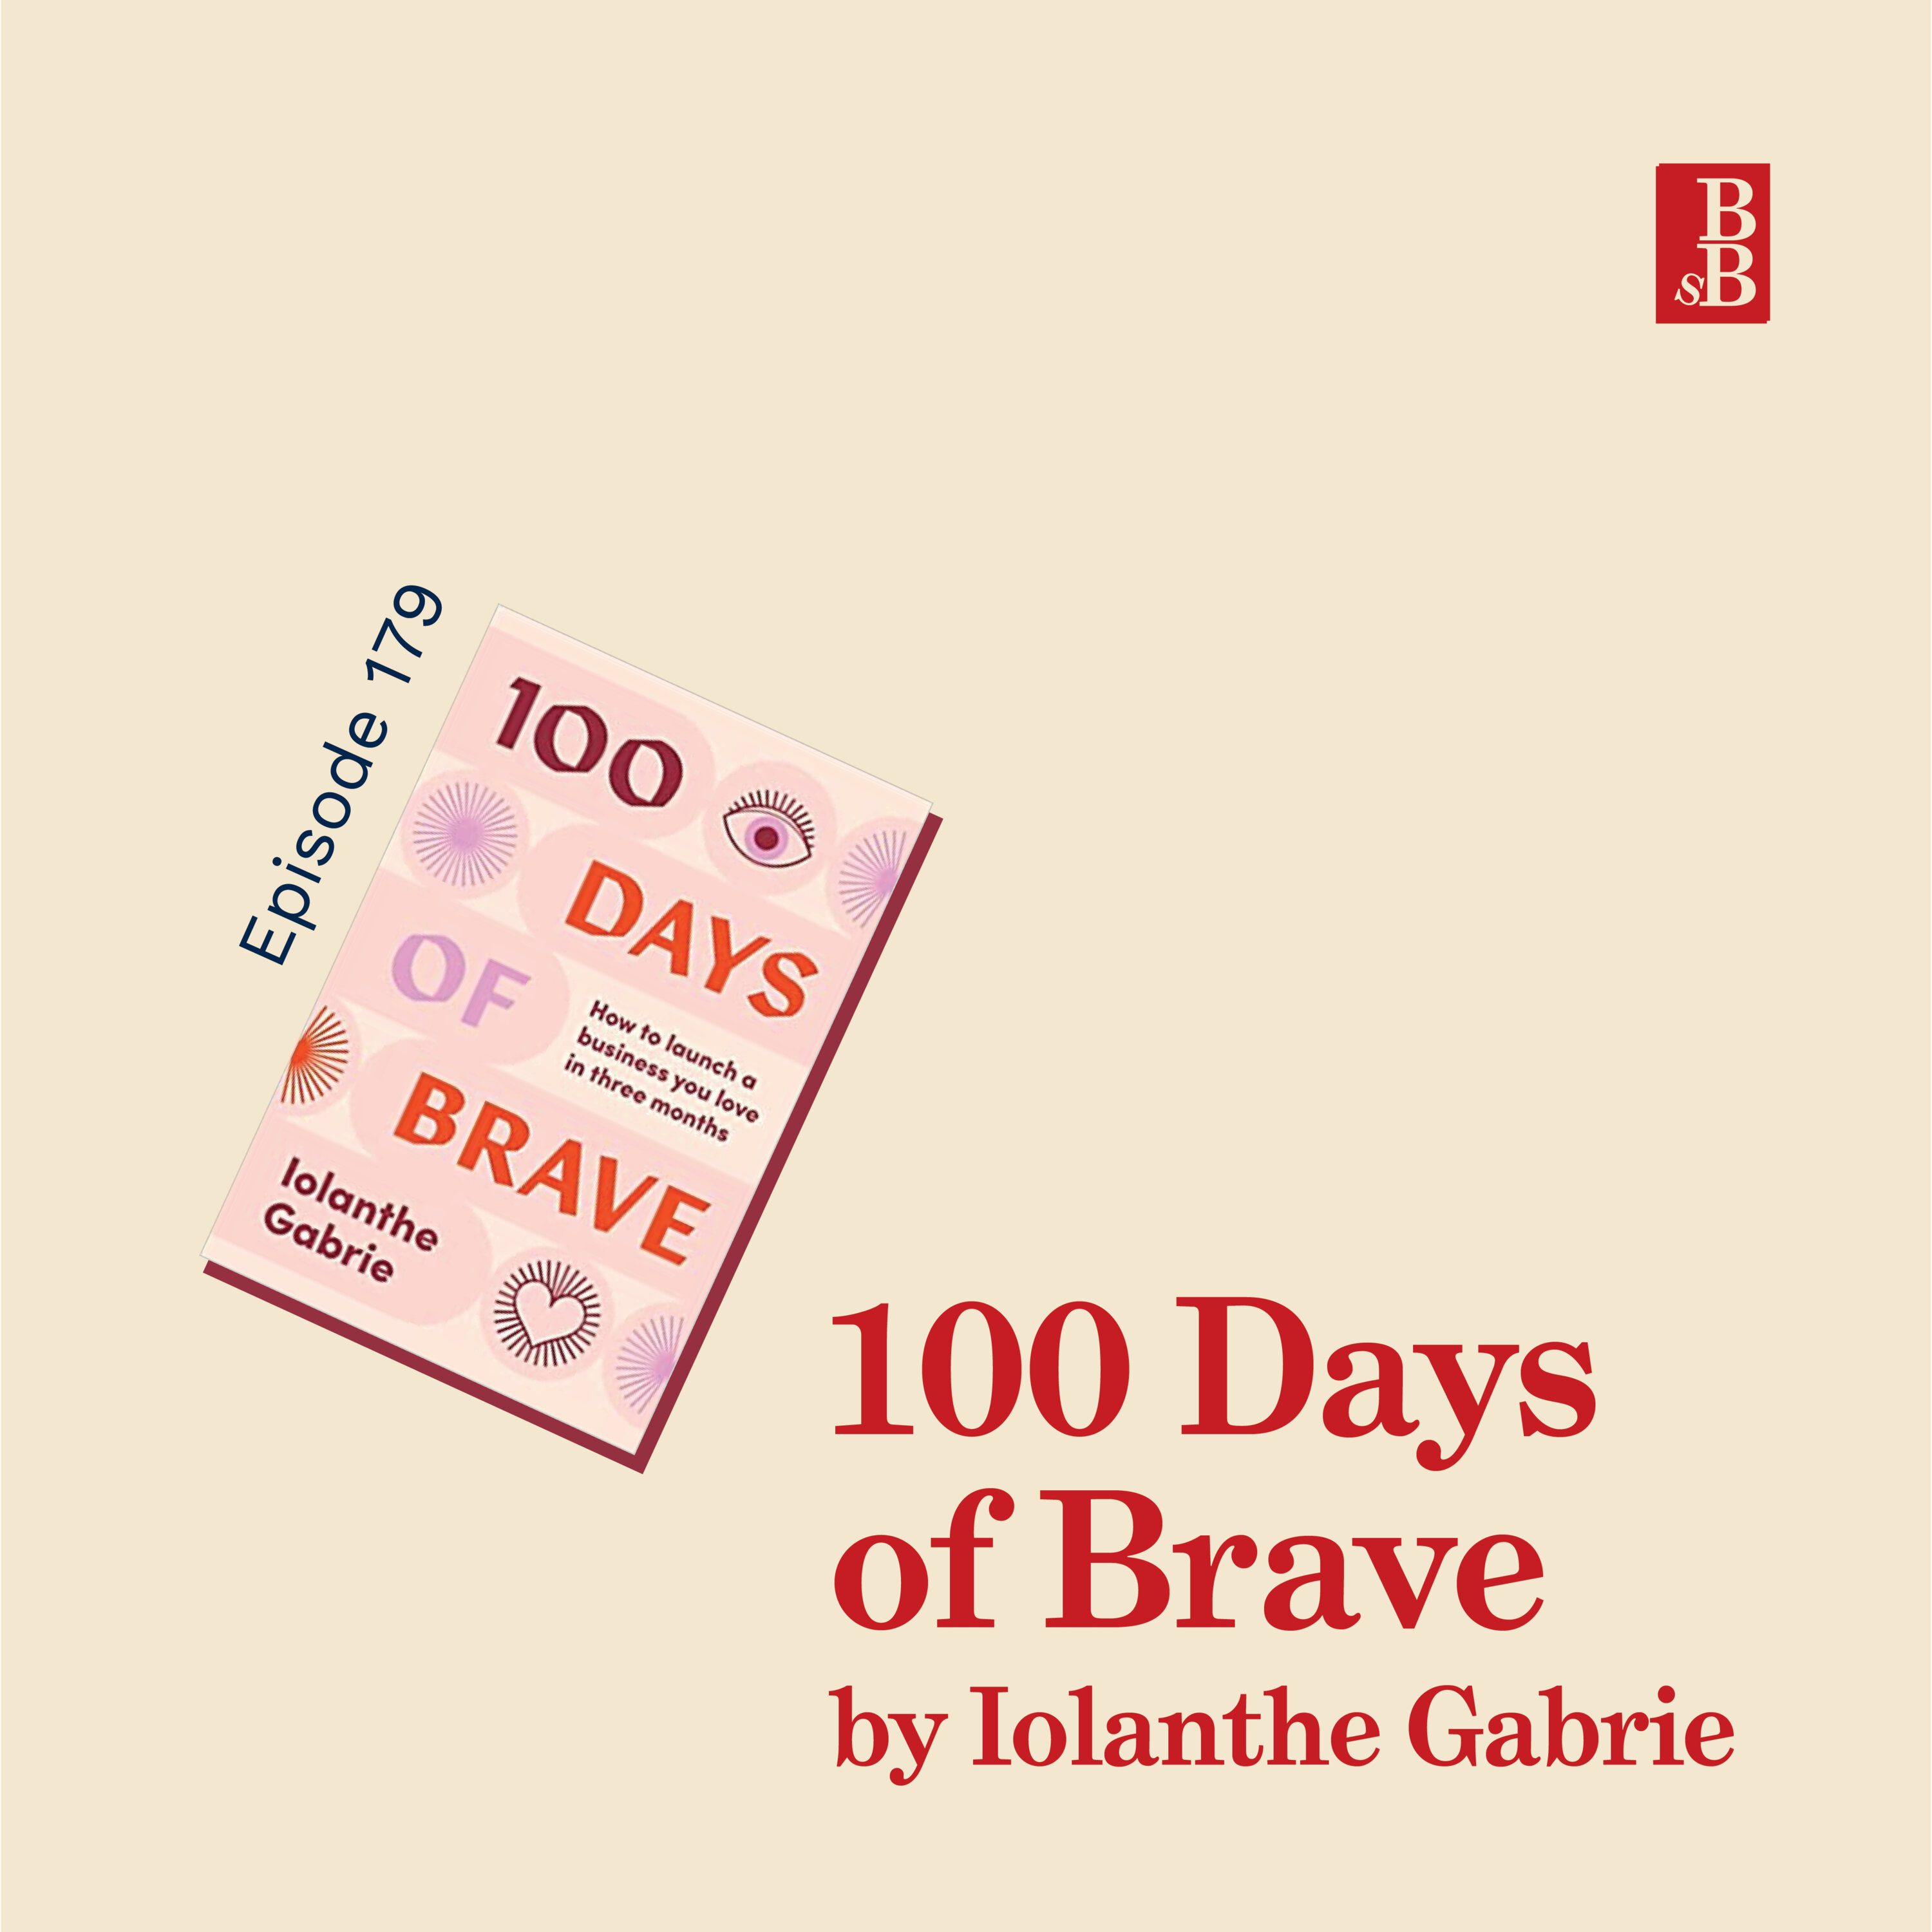 100 Days of Brave by Iolanthe Gabrie: how to build your brave muscle Image